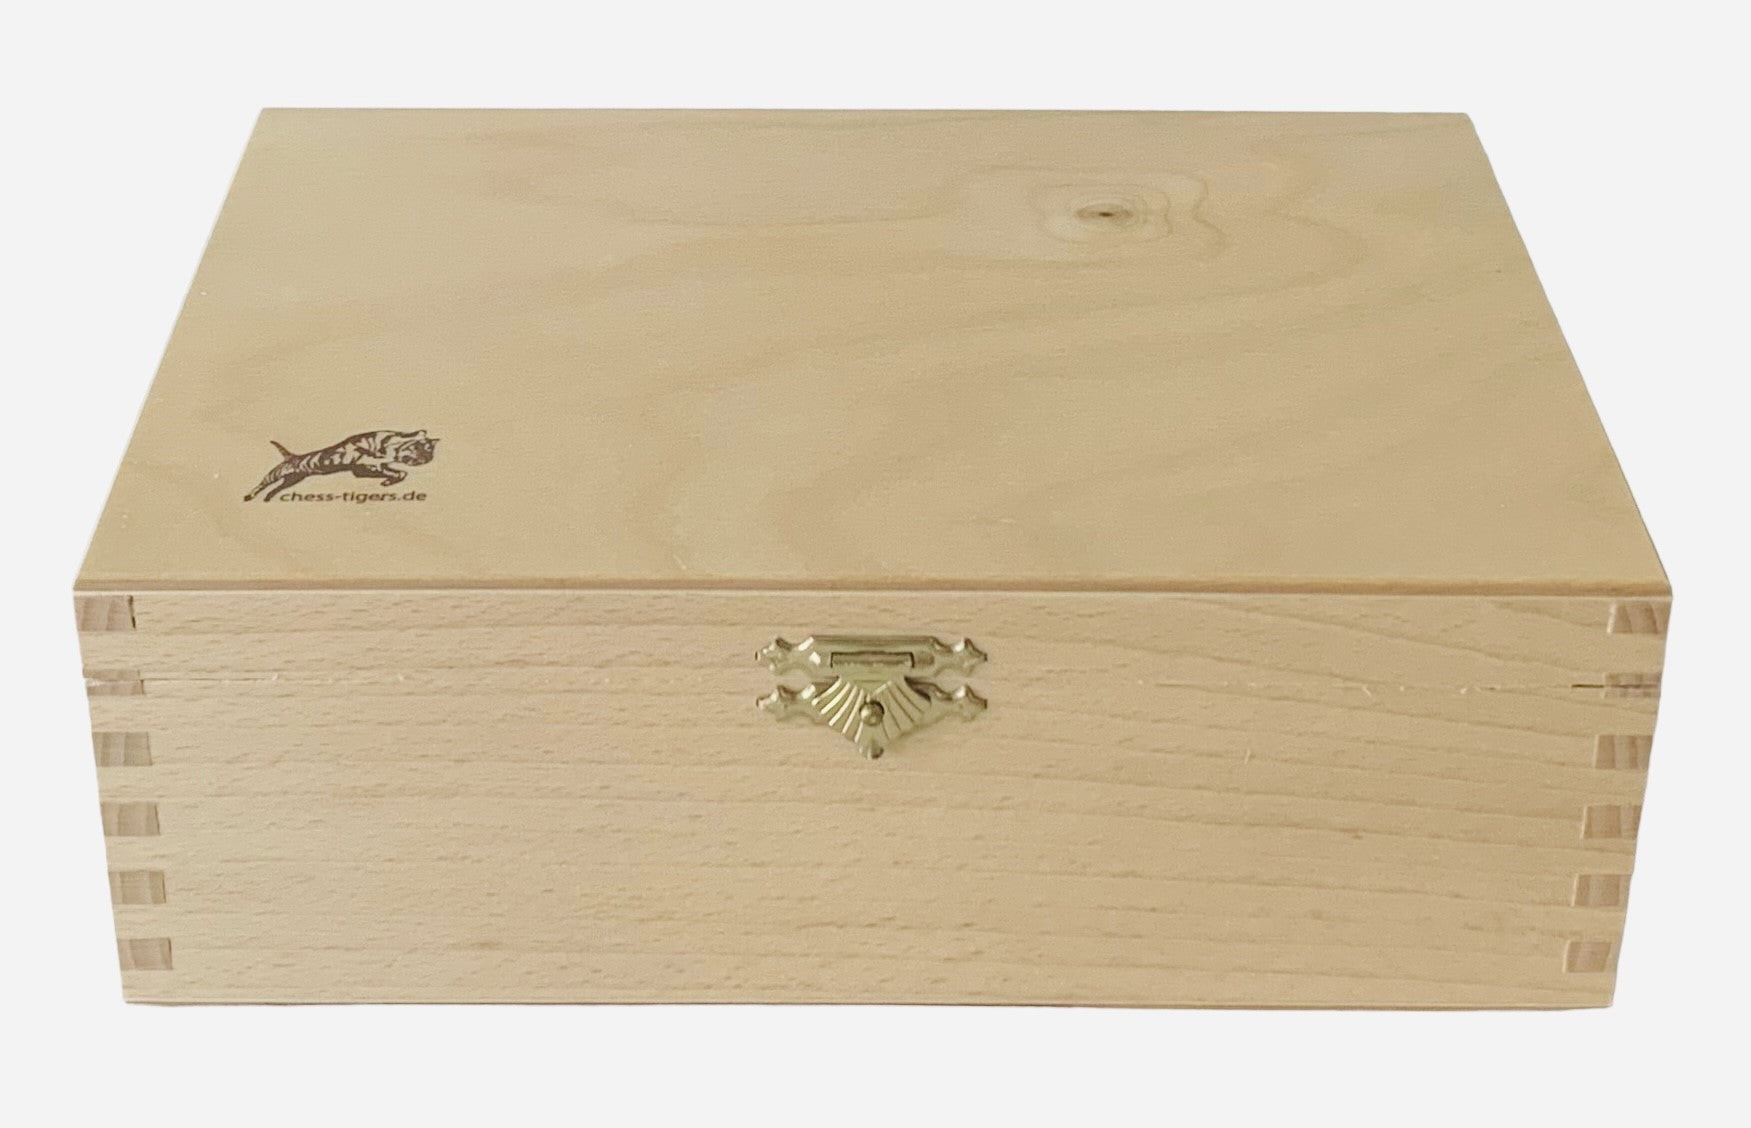 Wooden box for chess pieces with Chess Tigers logo